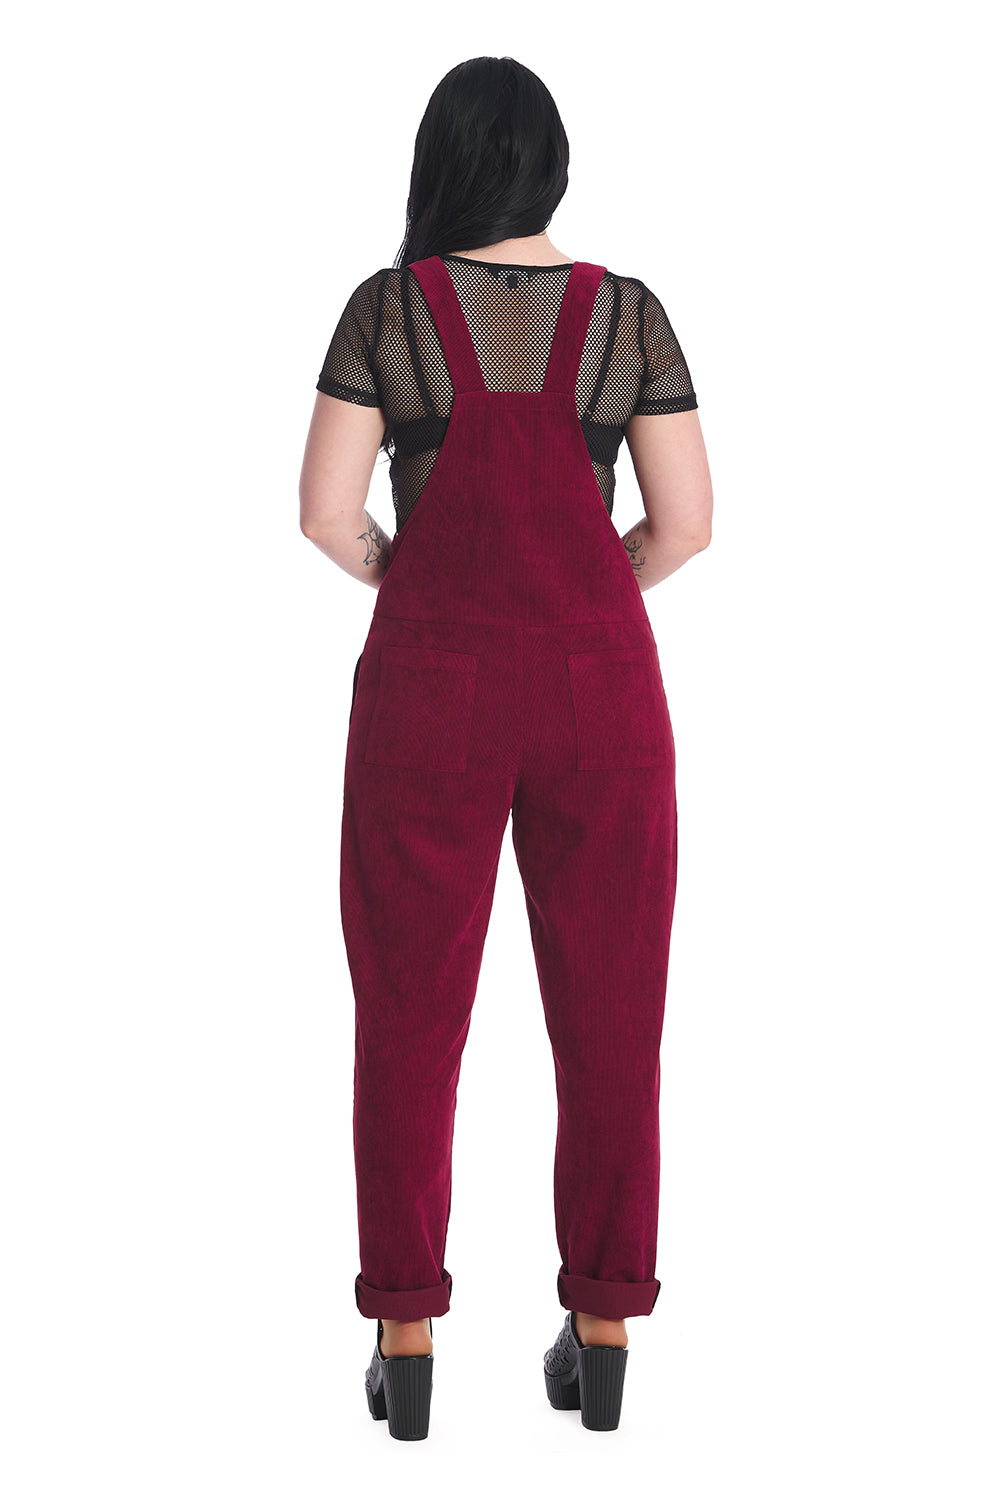 Gothic model in burgundy dungarees with a black mesh top 